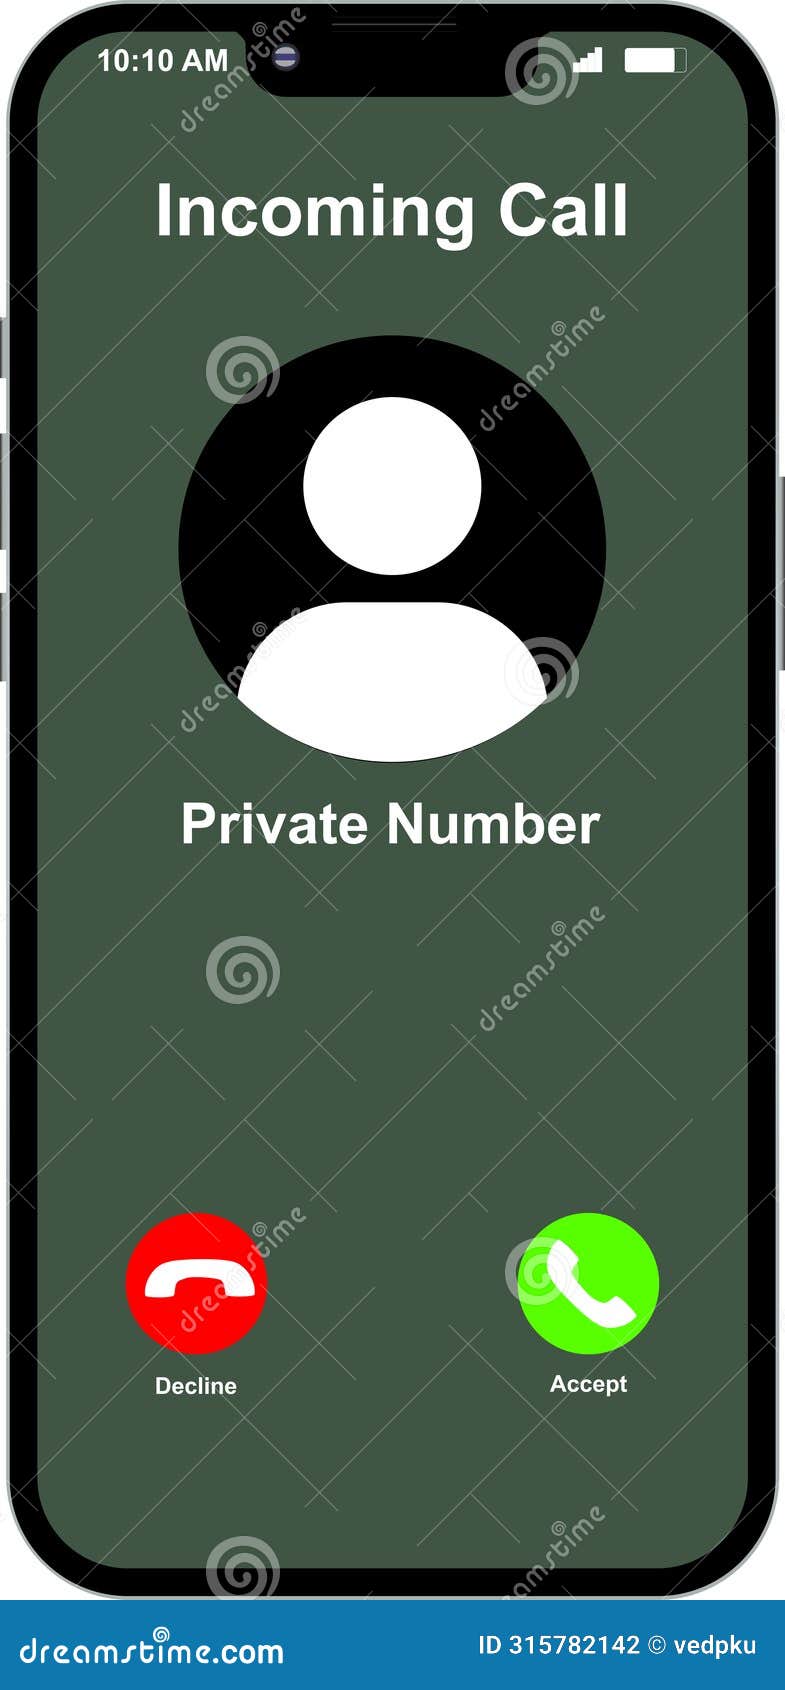 private call screen, incoming call screenshot, private number calling mobile, phone call interface